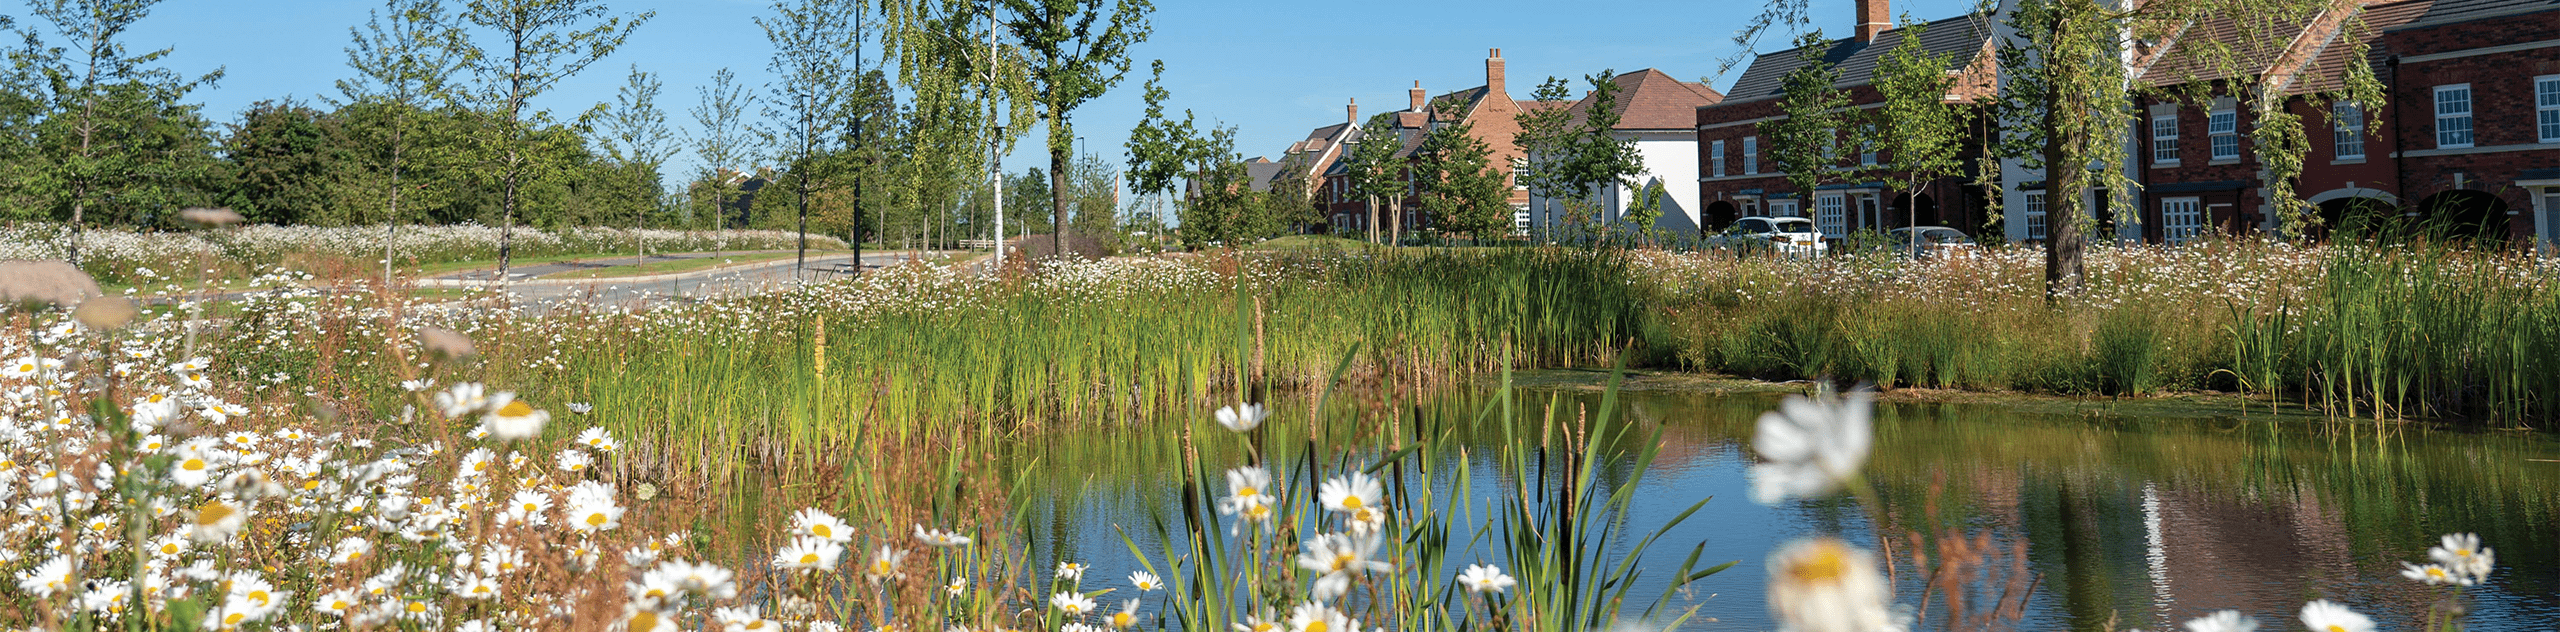 A photograph of the wildlife ponds overlooked by housing at the Houlton entrance. © BMD